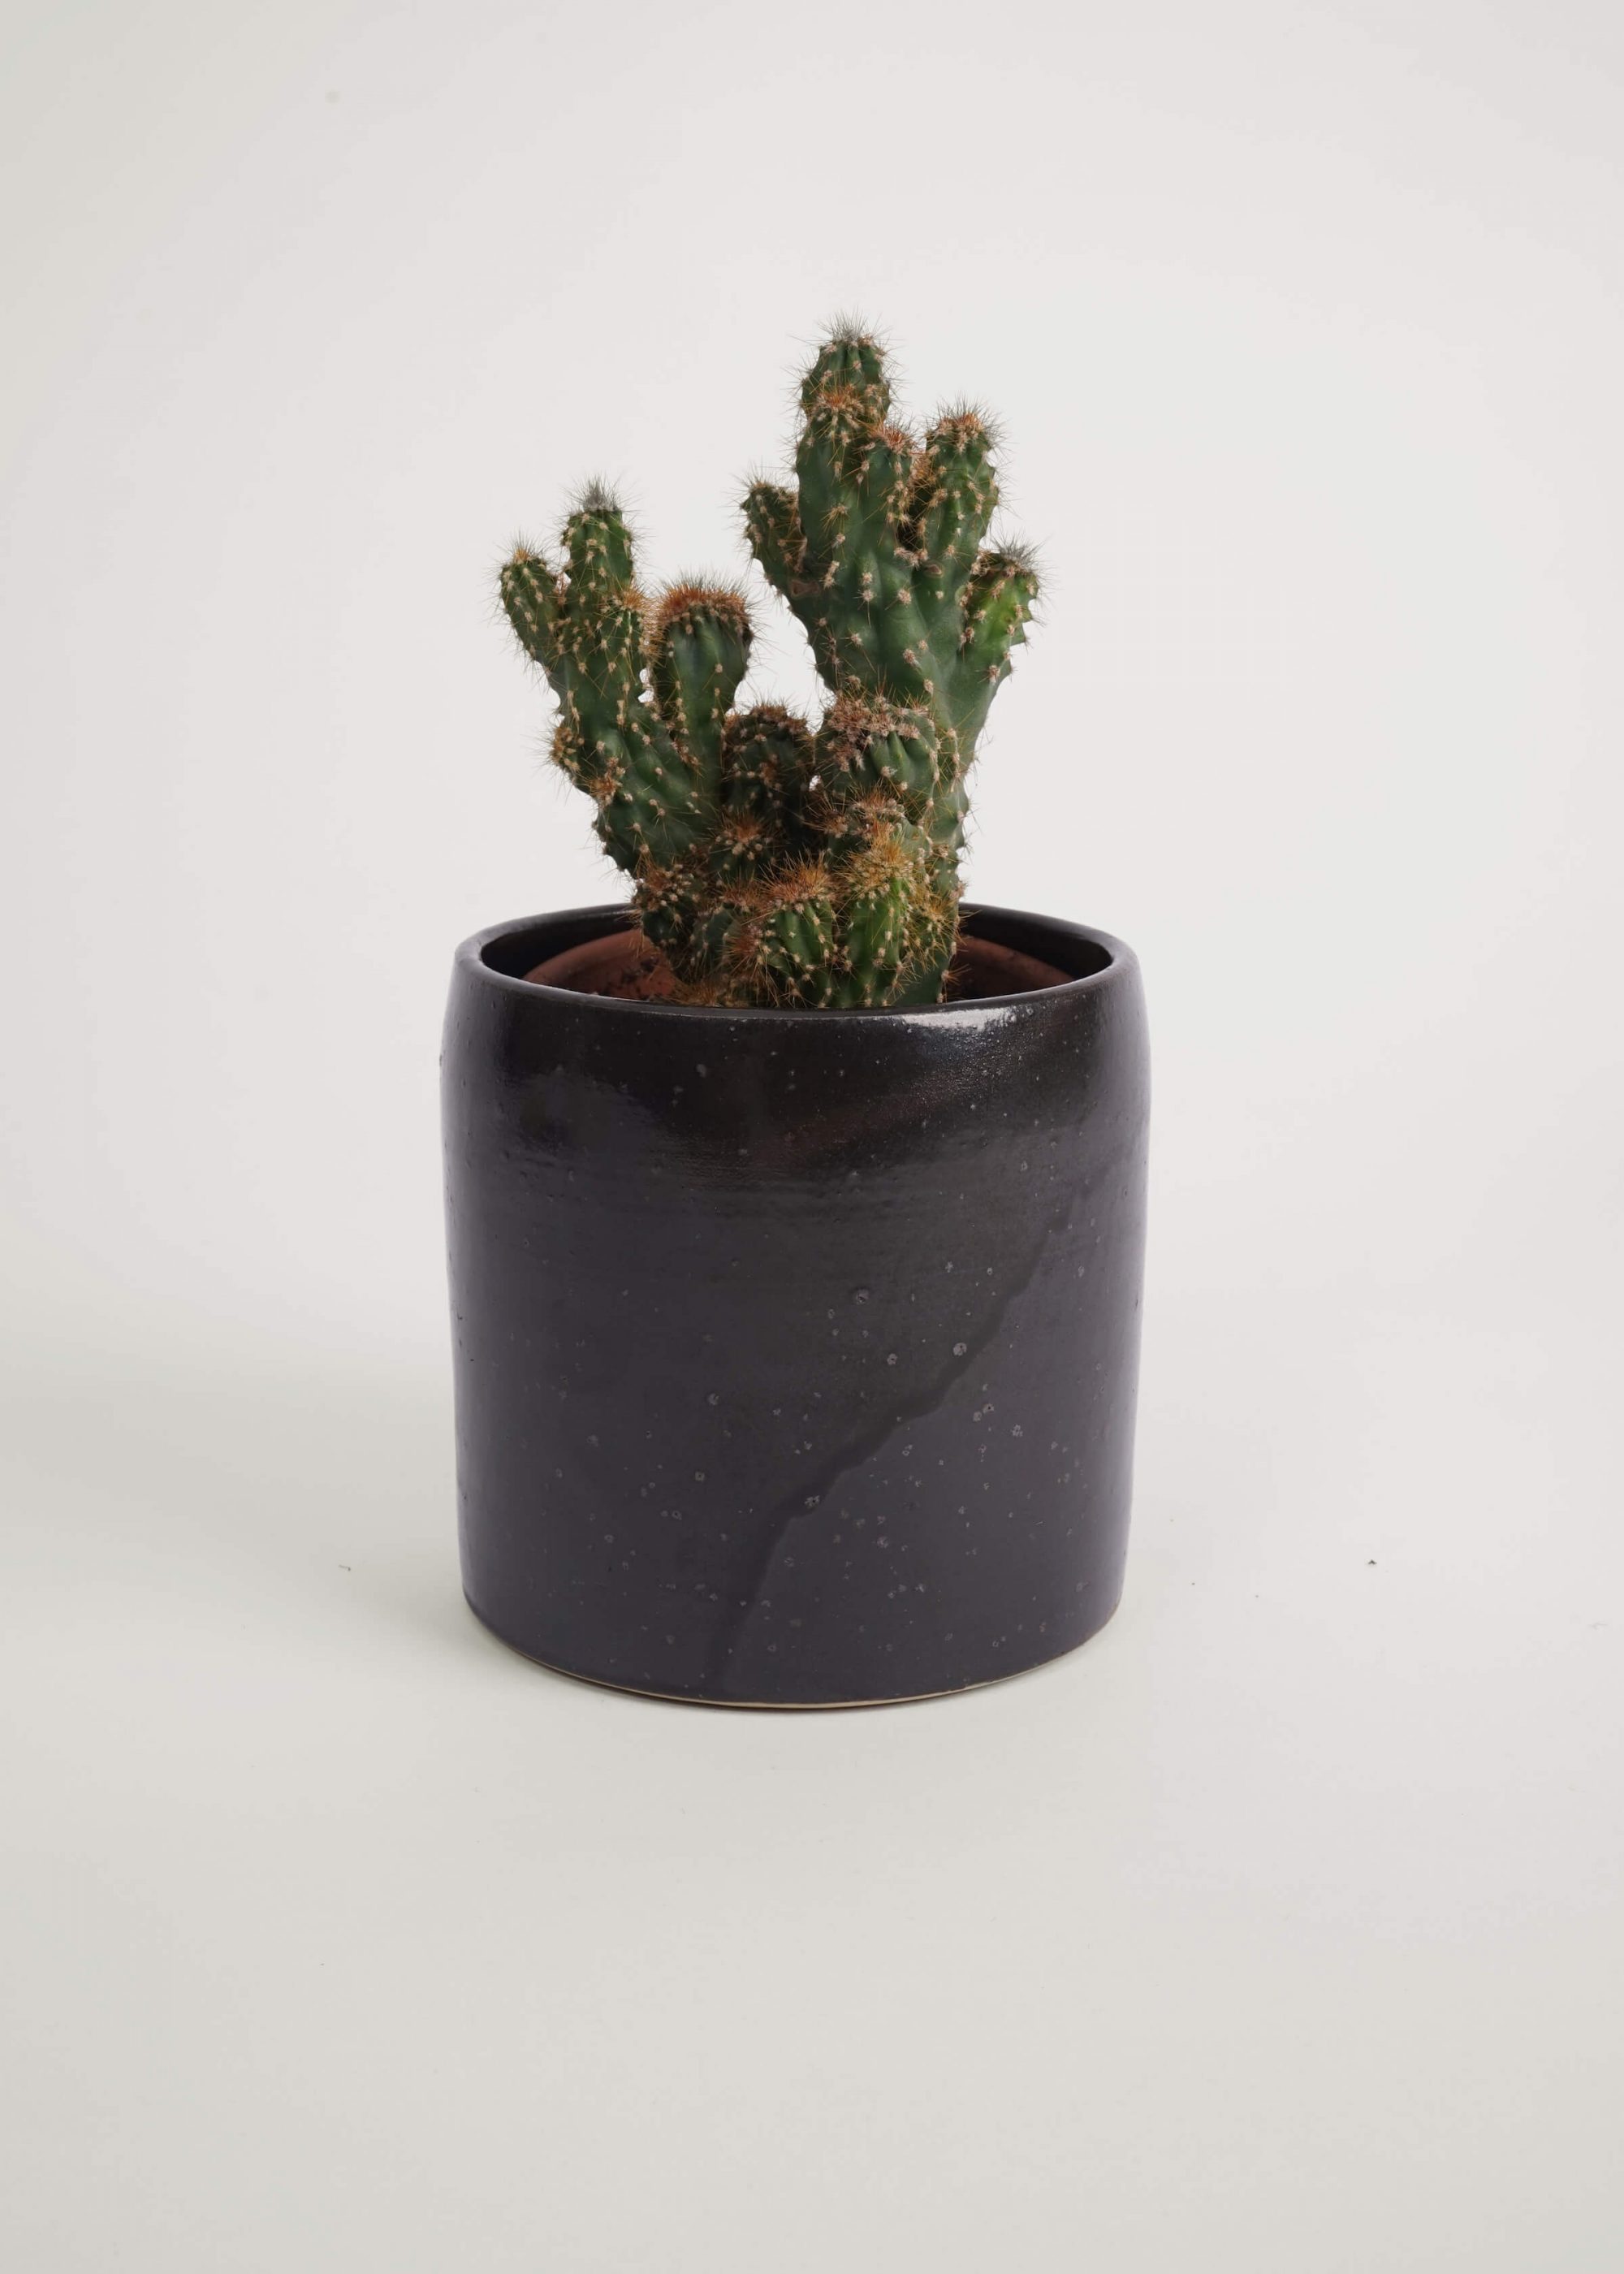 Product image for N° ICD4 Burri Plant Pot S